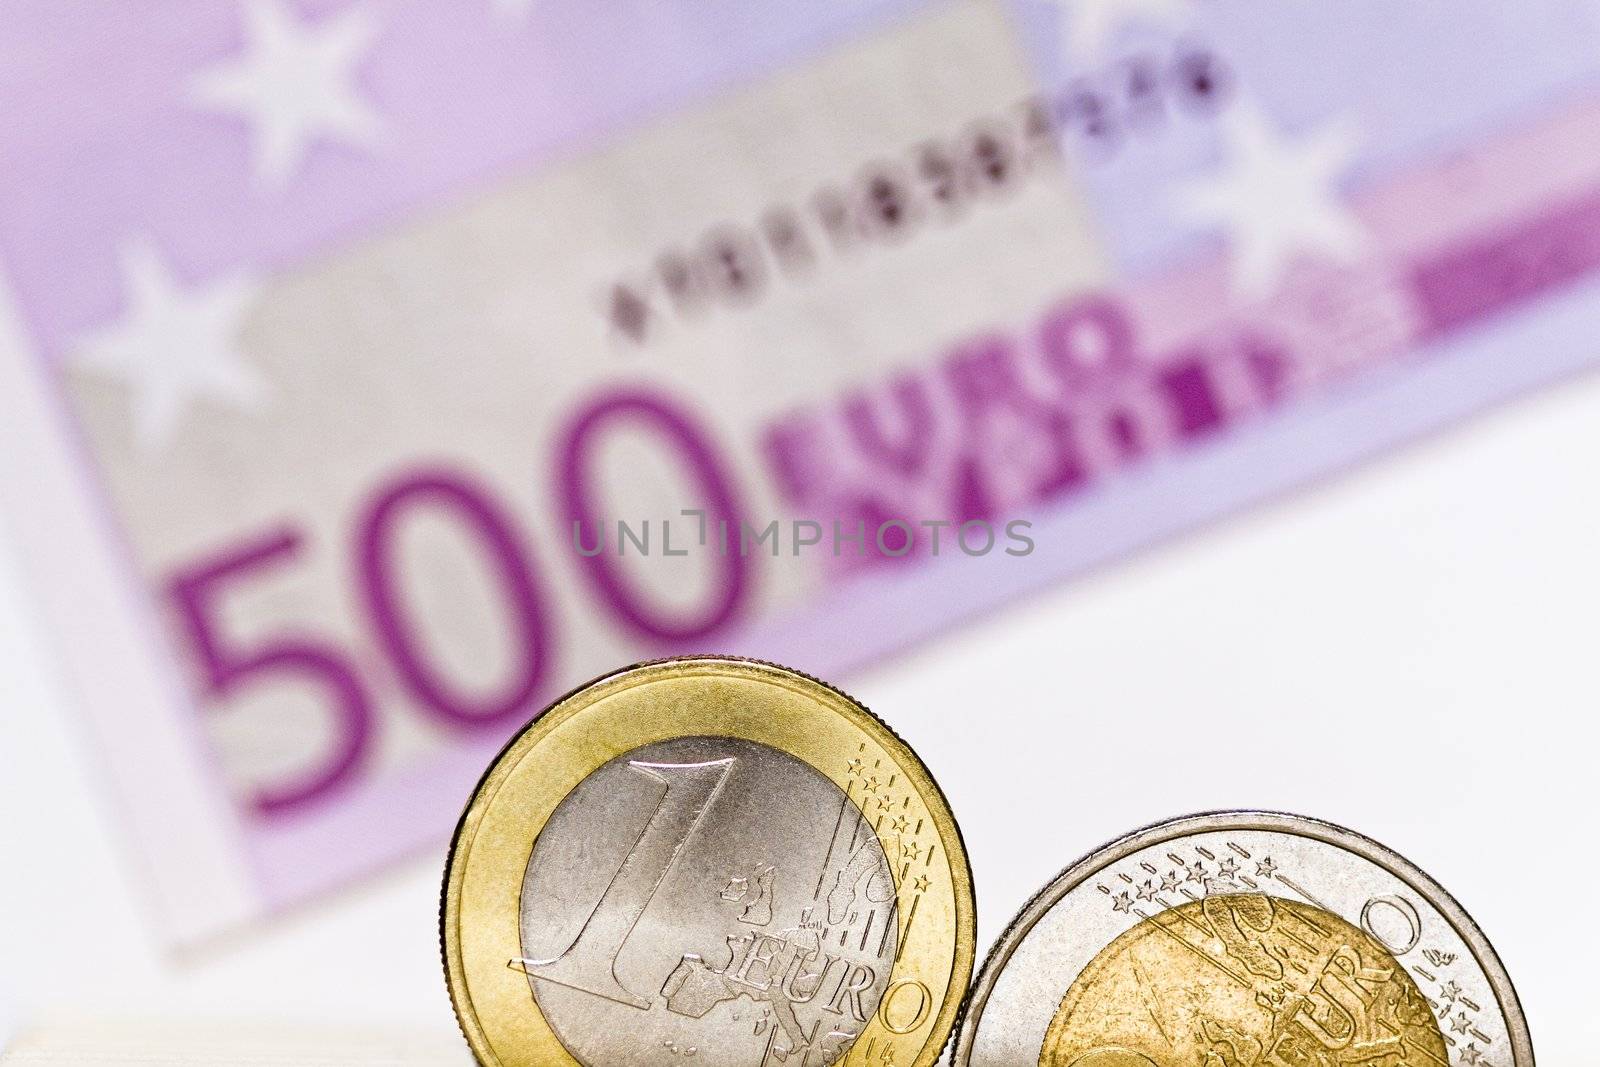 Shiny euro coins on a background of blurry 500 euro note